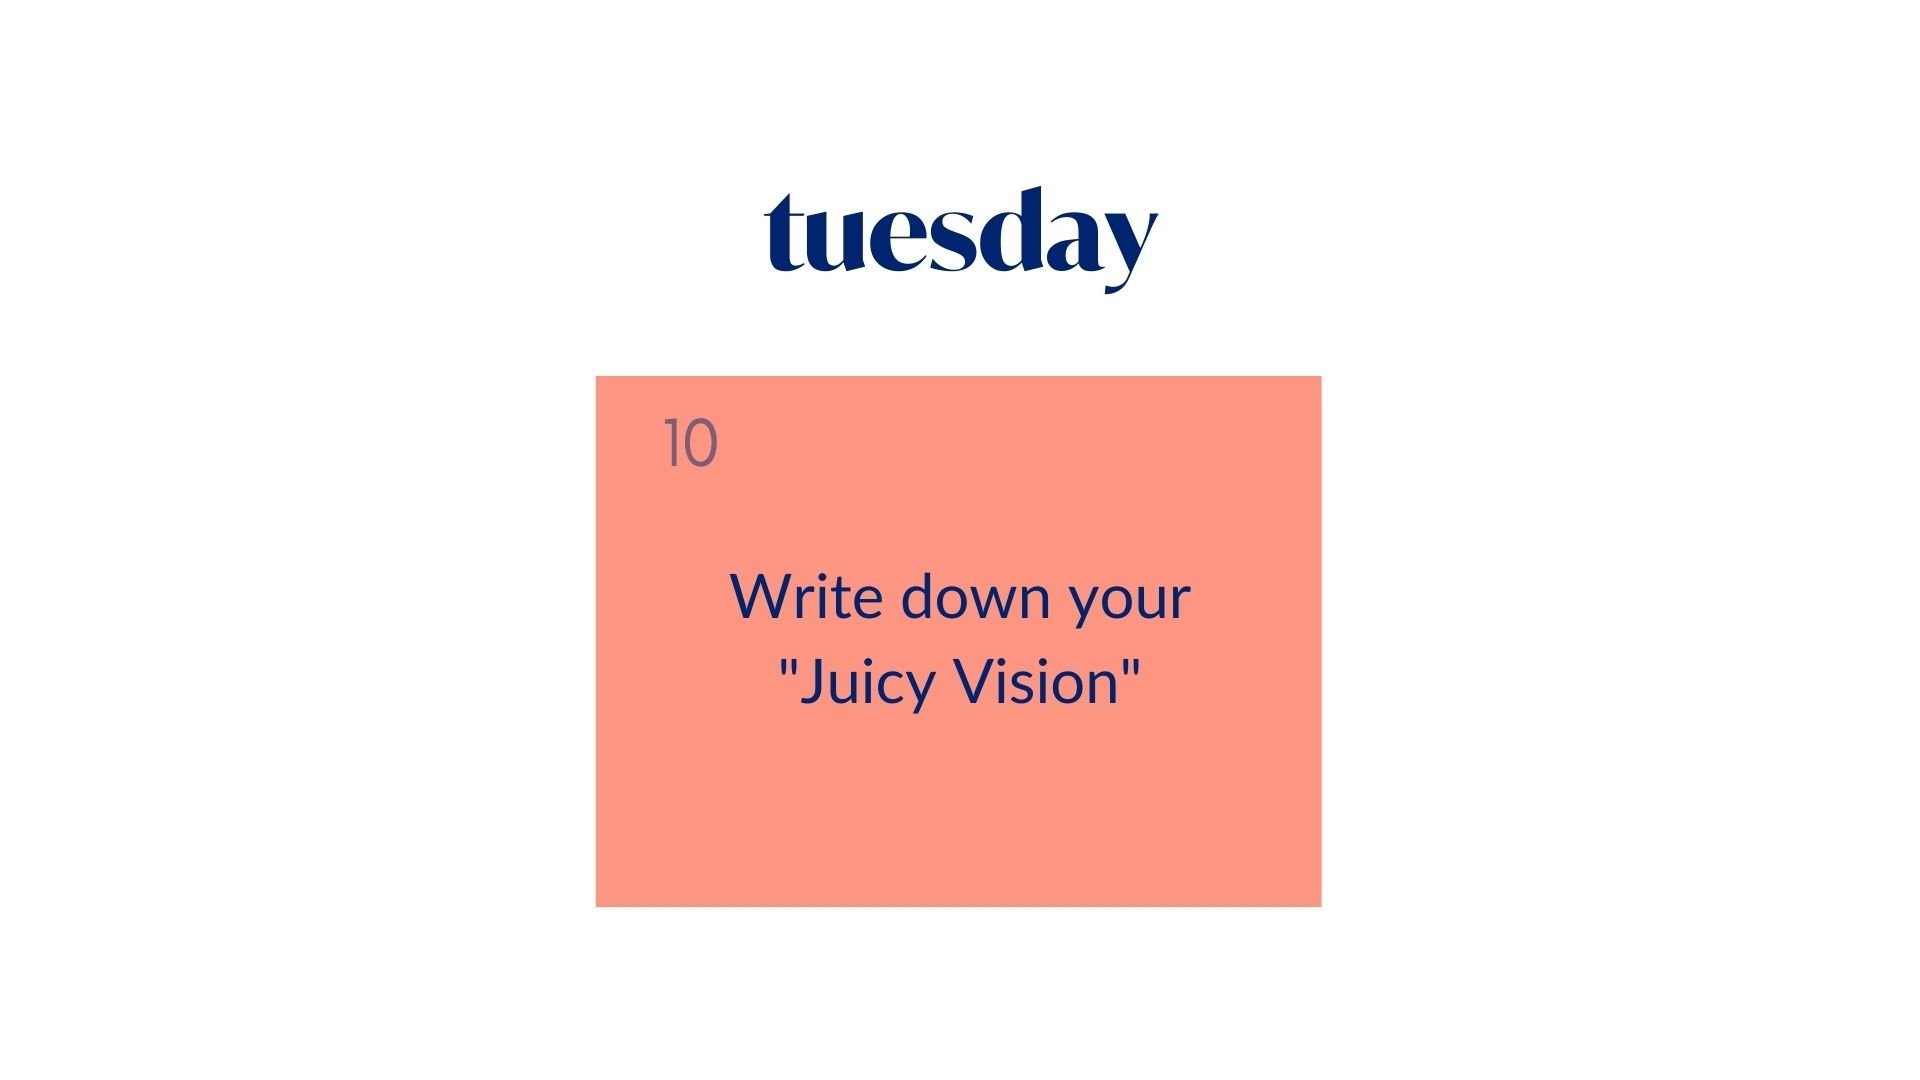 Day 10: Write down your "Juicy Vision"